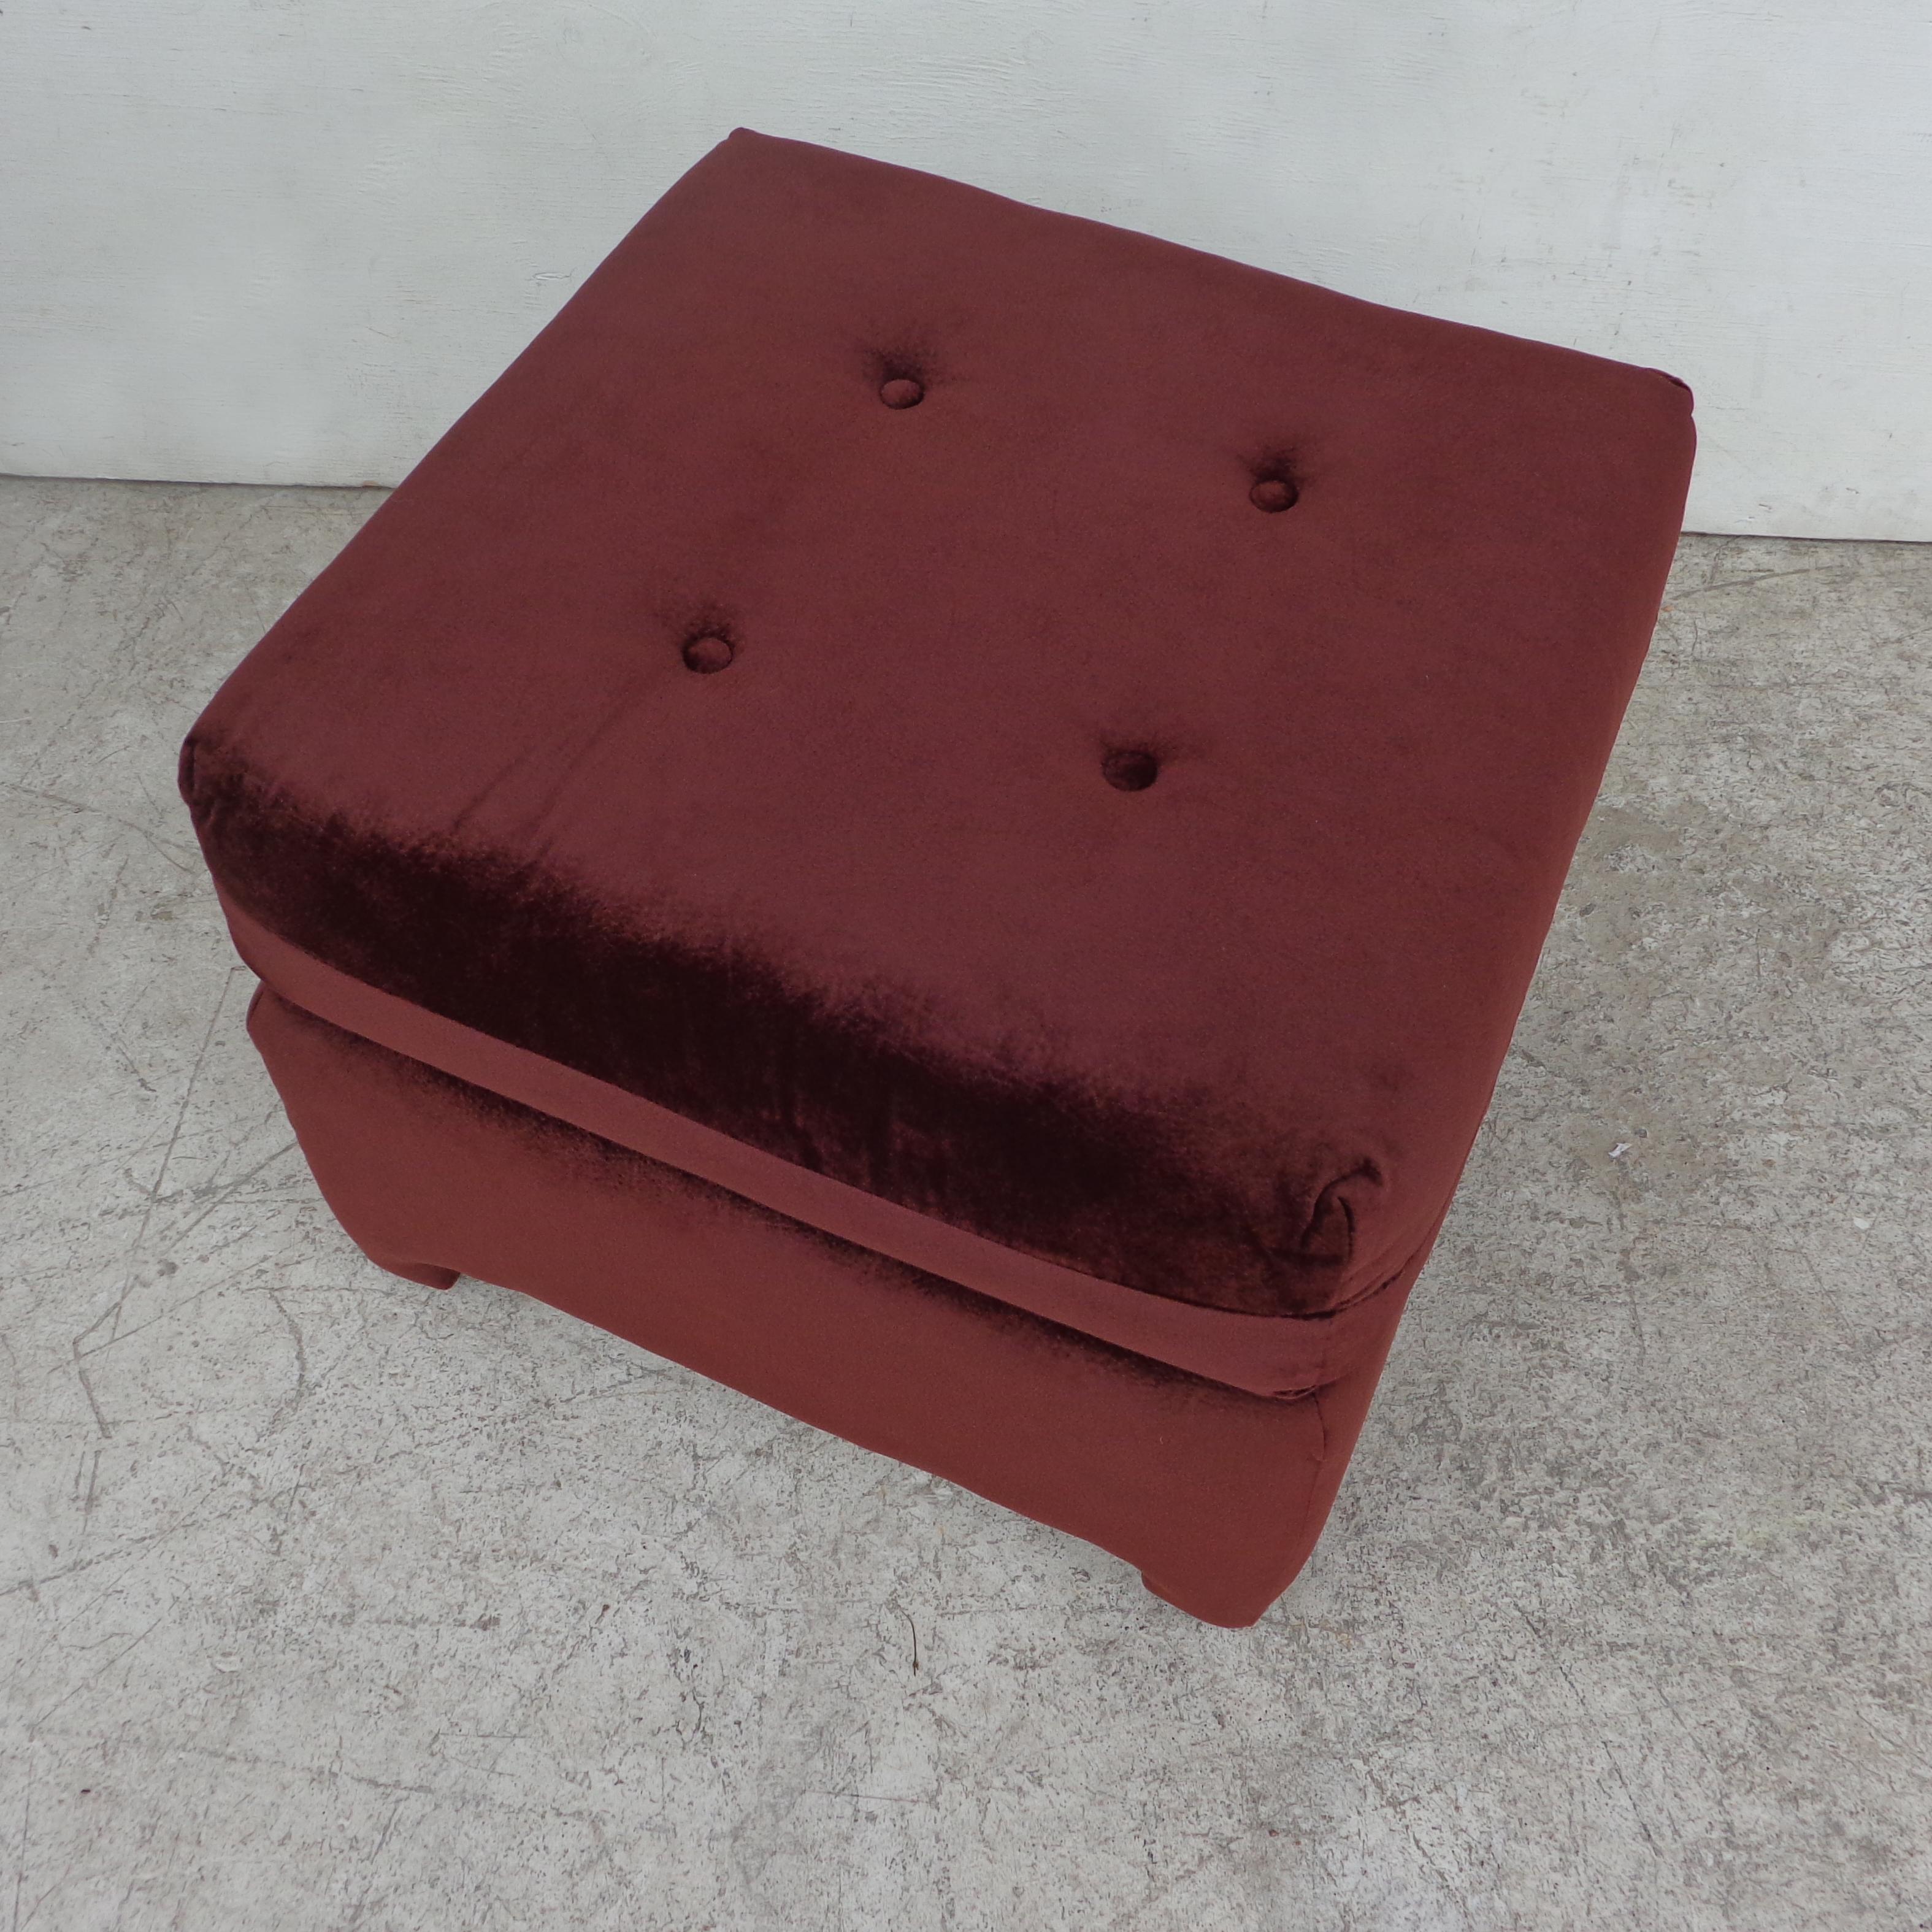 North American Pair of Modern Tufted Ottomans For Sale